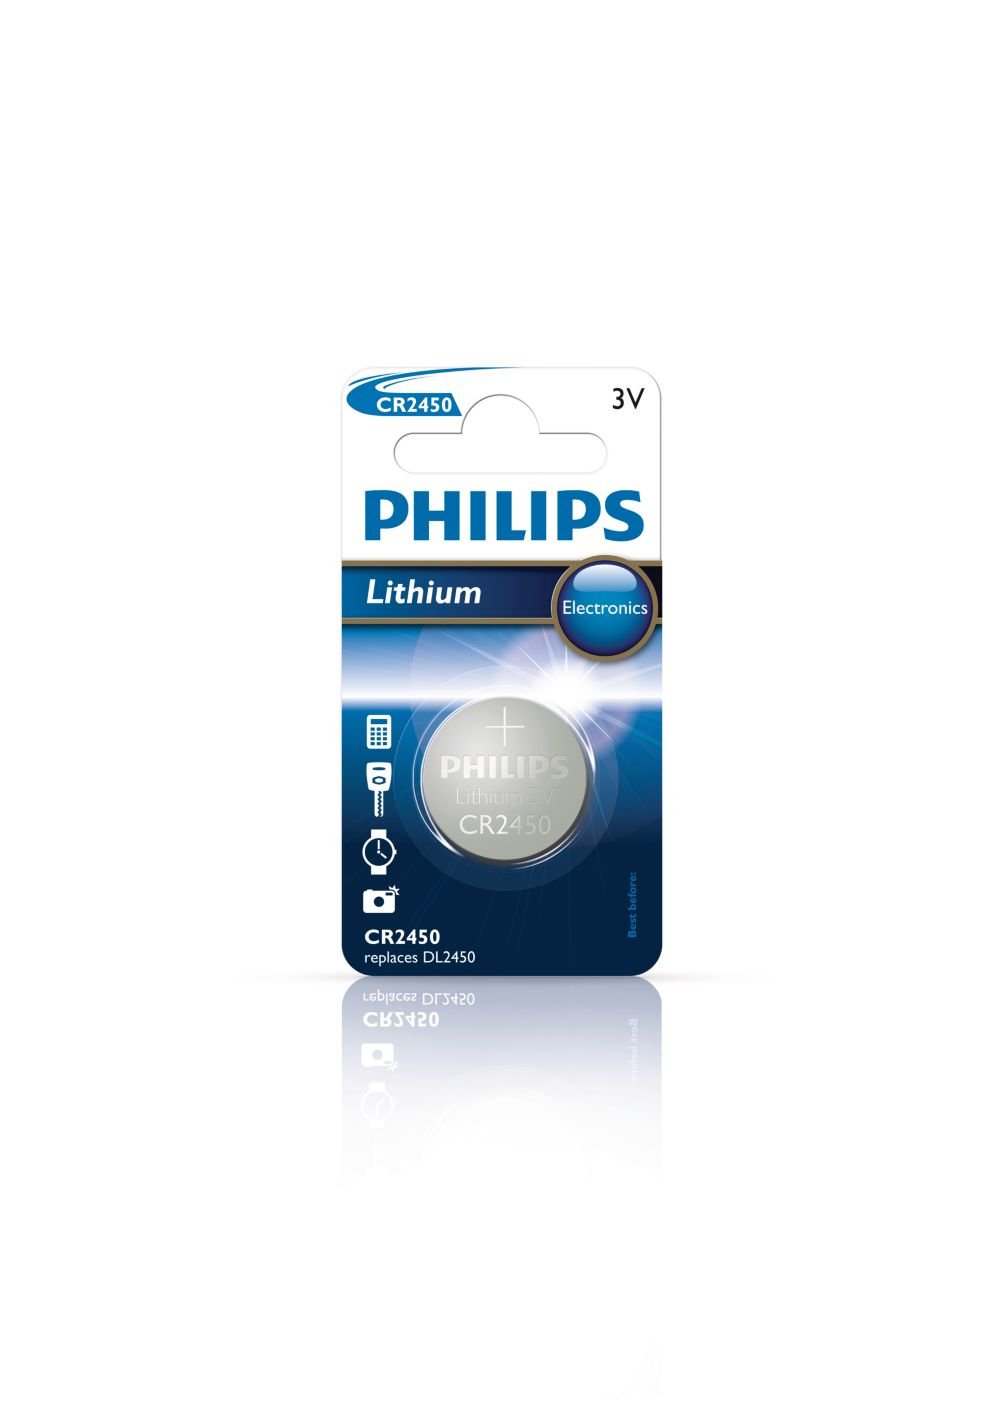 PHILIPS CR2450/10B Batteries and Lamps von PHILIPS